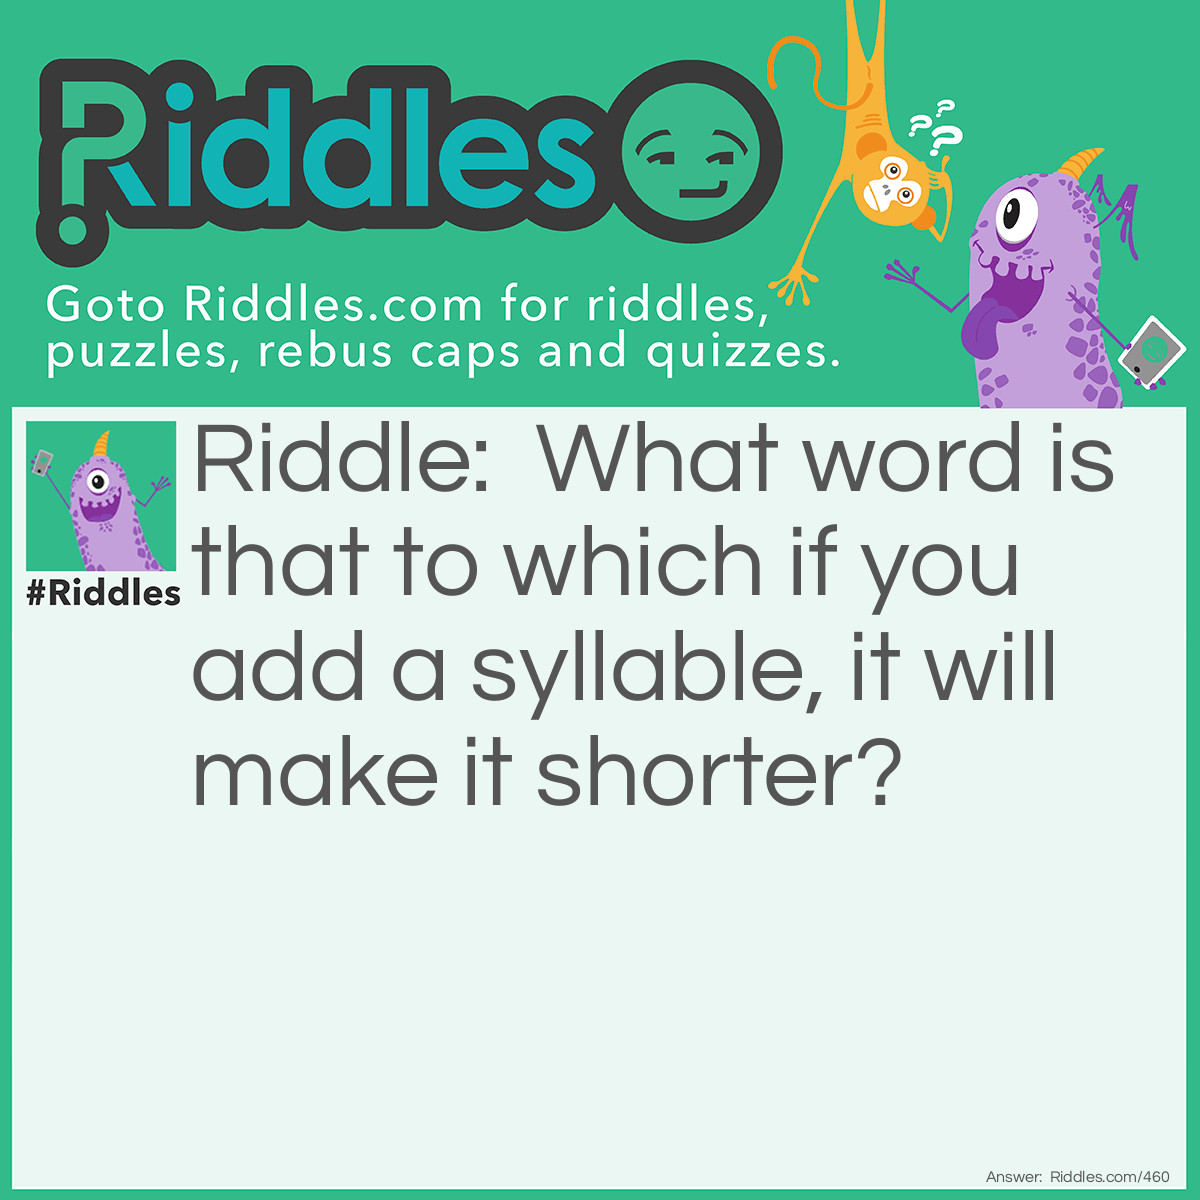 Riddle: What word is that to which if you add a syllable, it will make it shorter? Answer: Short.